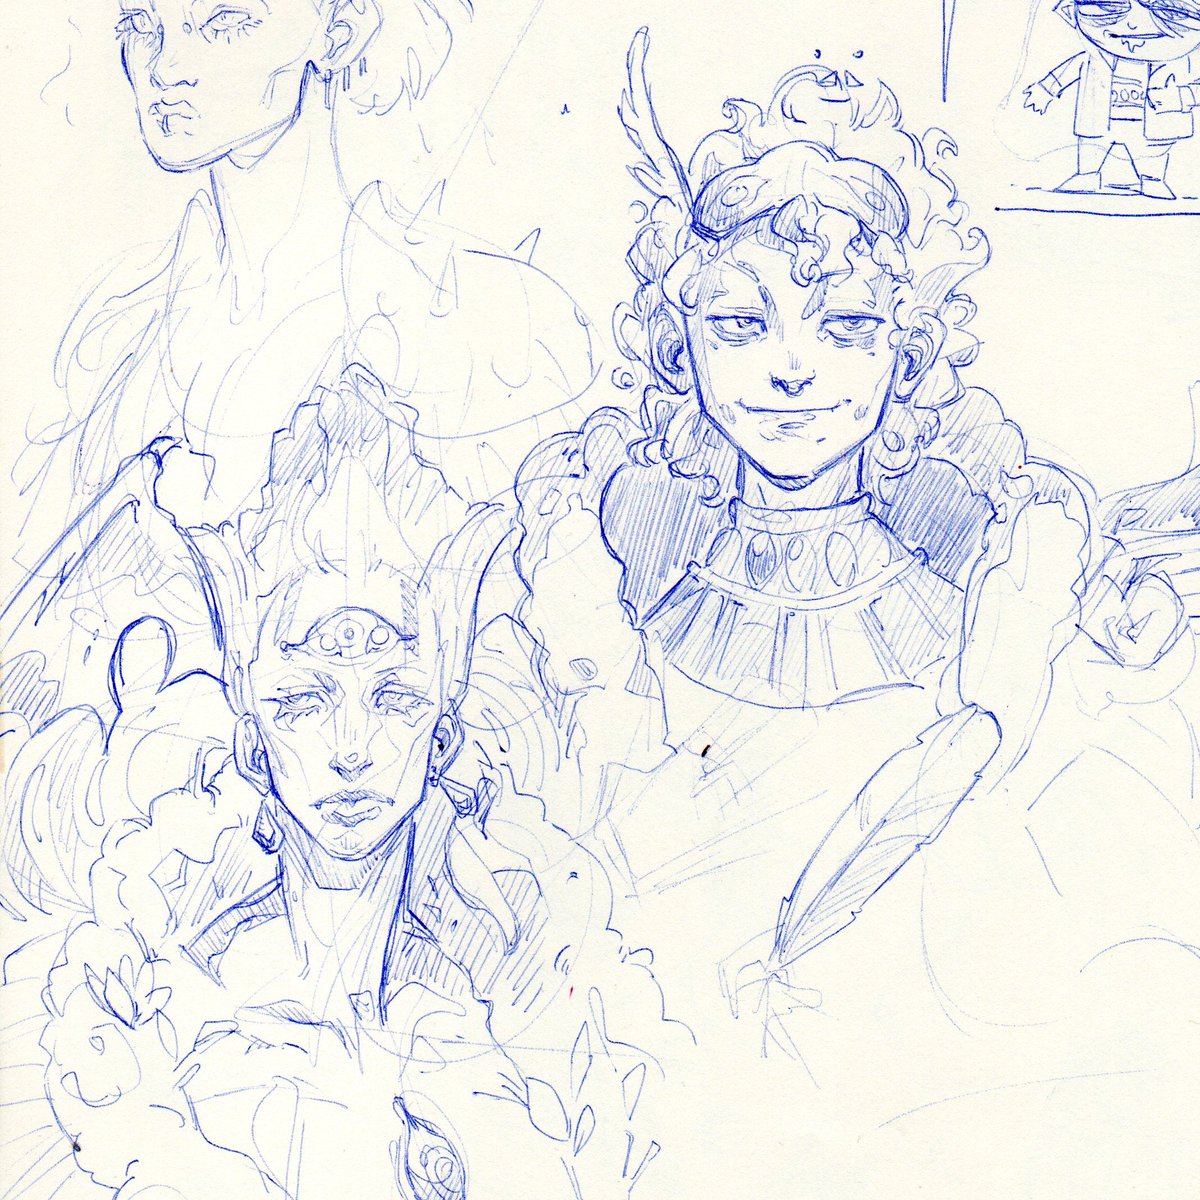 Hades sketches back from 2021